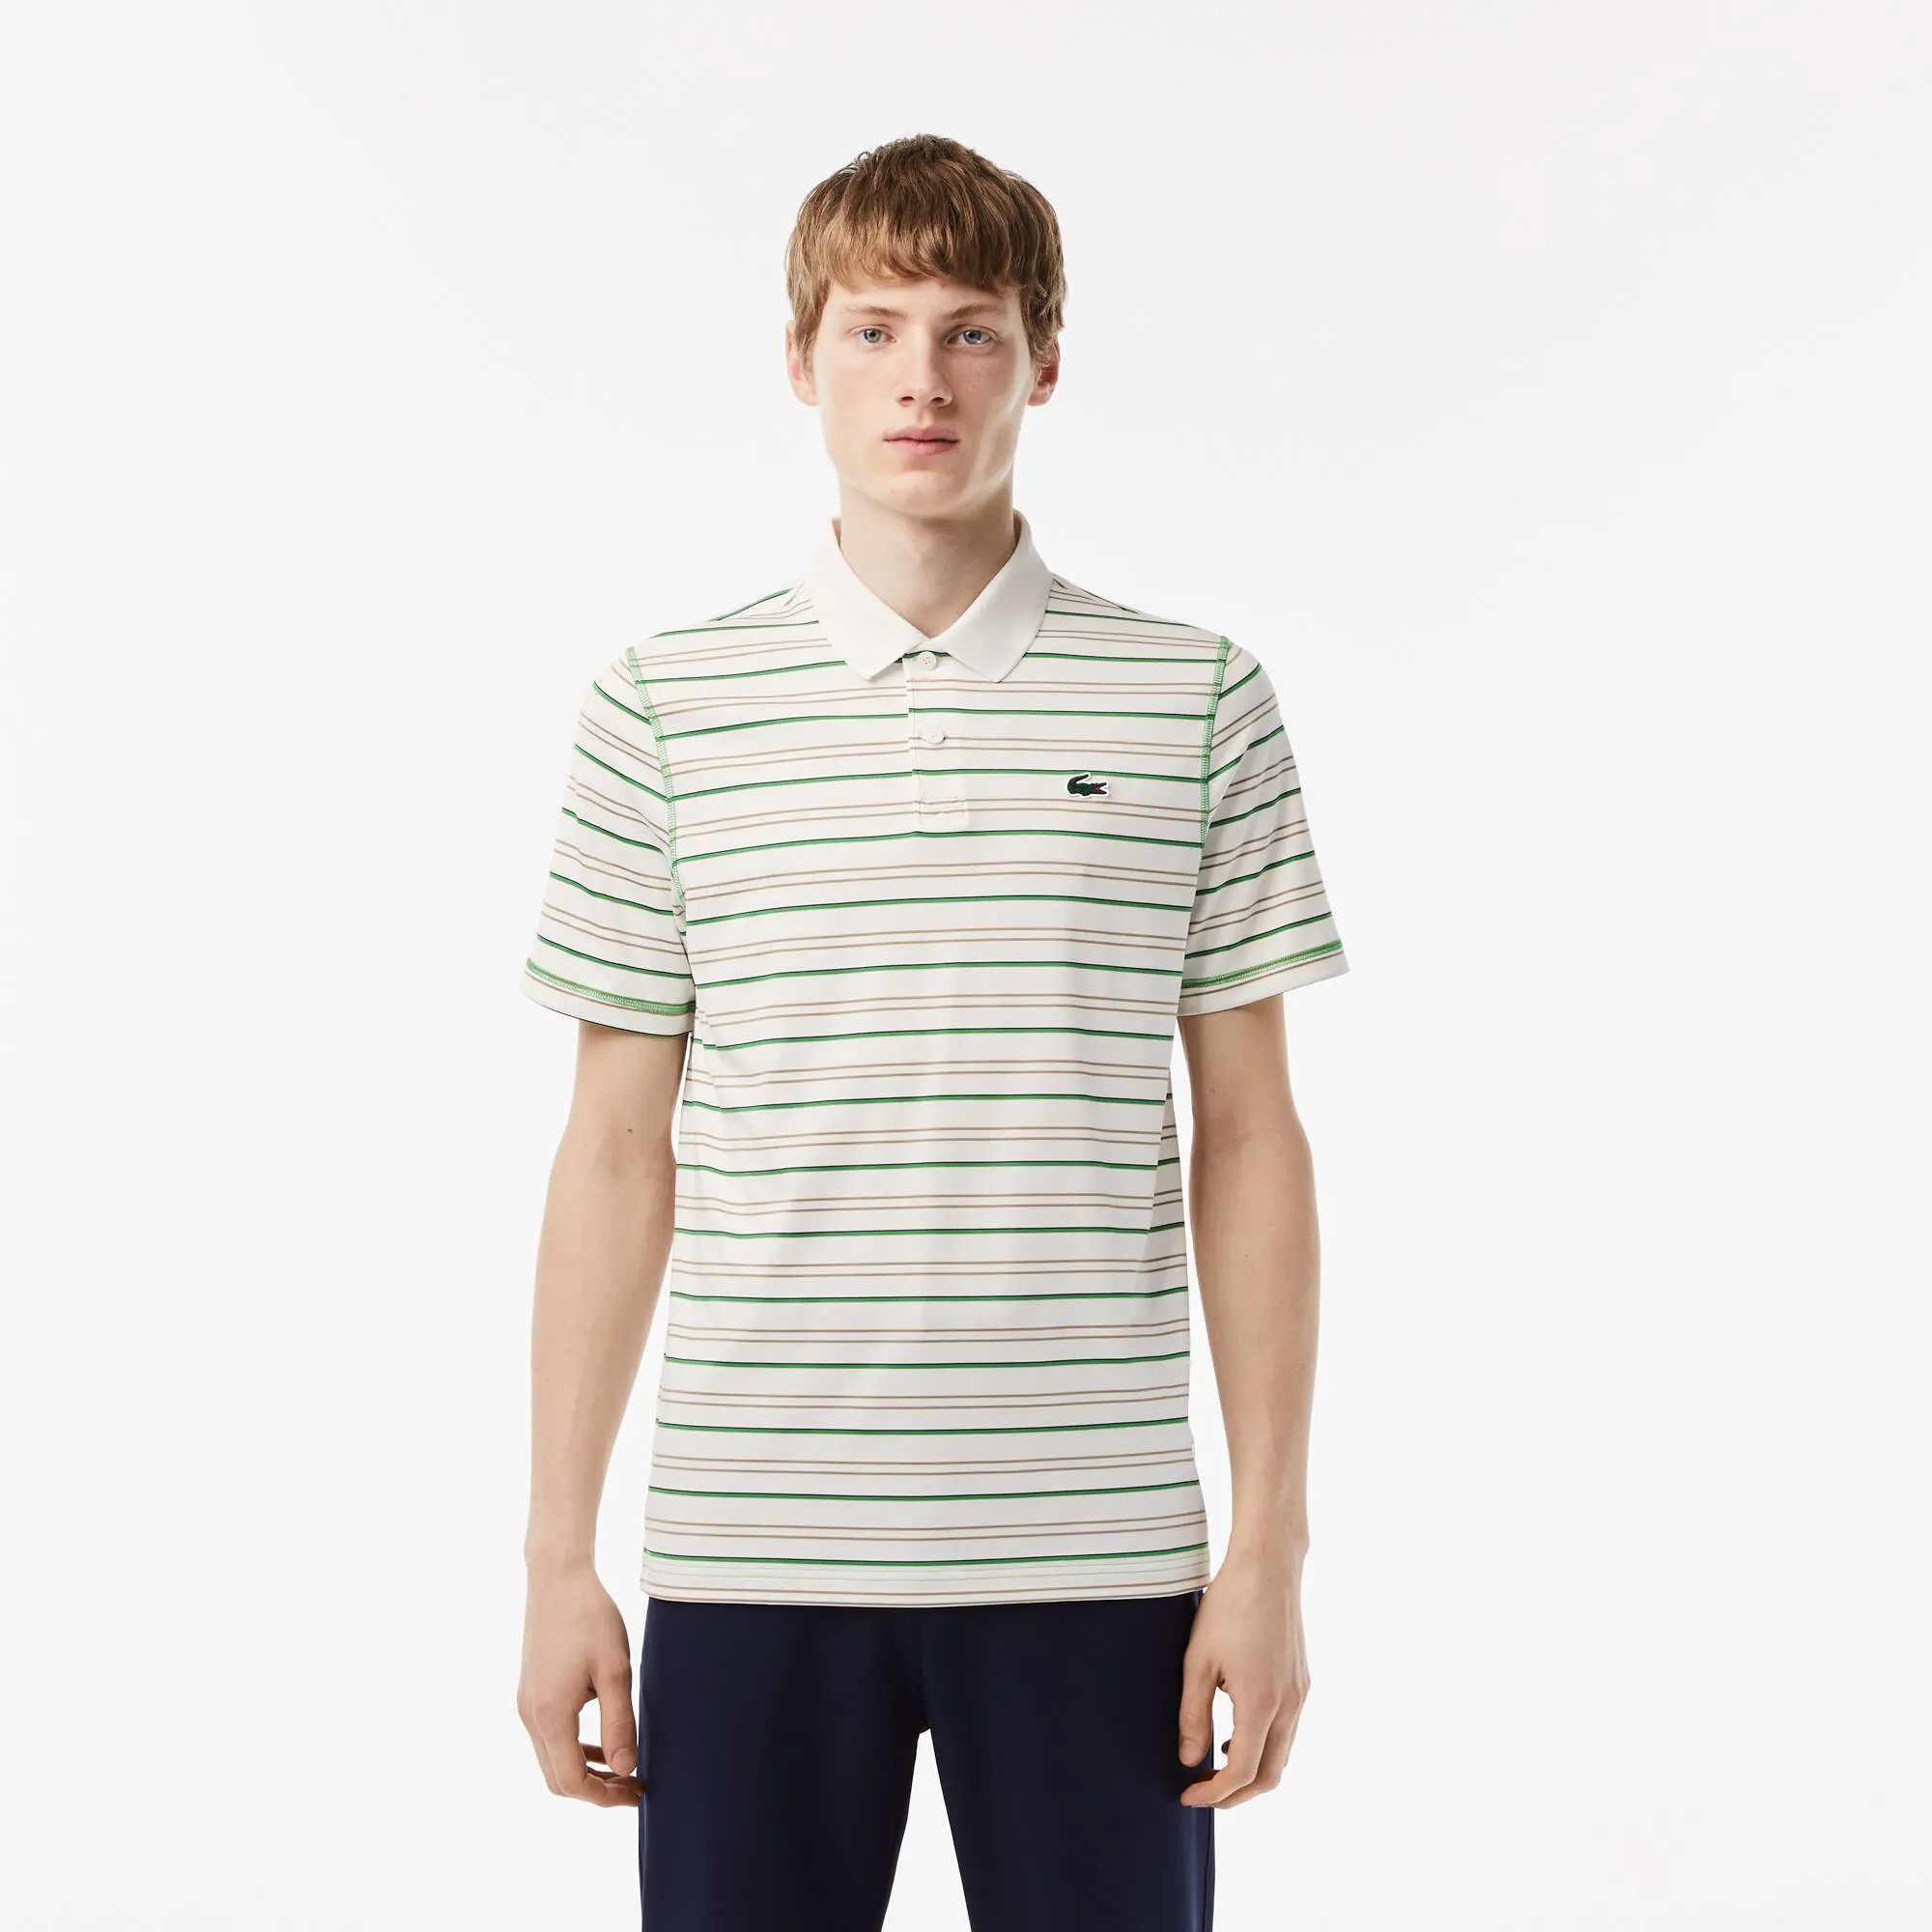 Lacoste Men’s Lacoste Golf Recycled Polyester Stripe Polo Shirt. 1